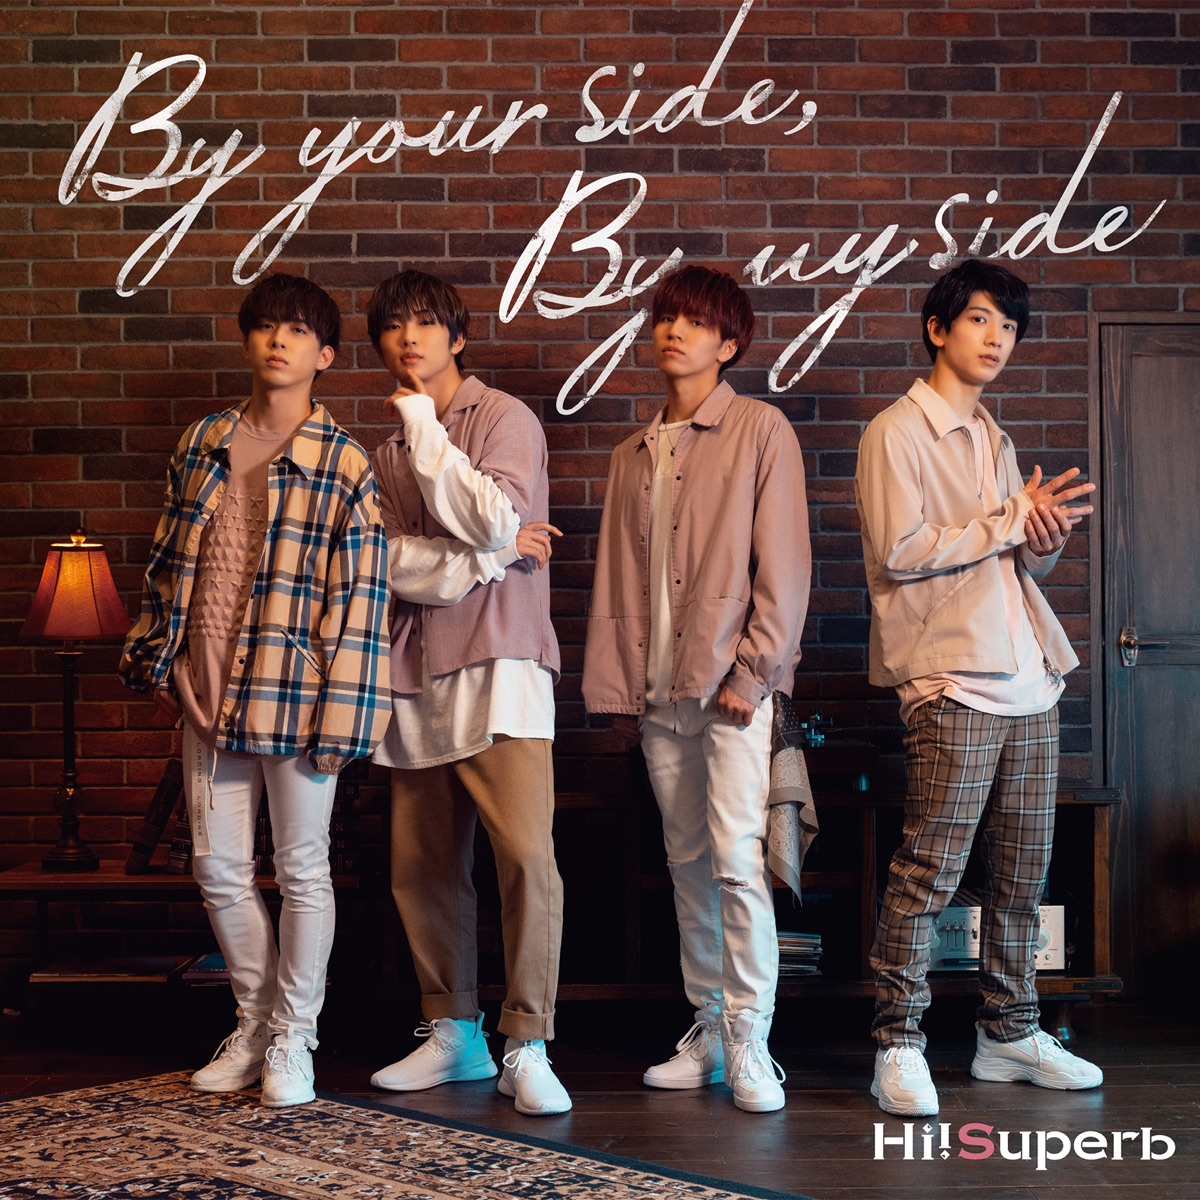 『Hi!Superb - シナイアイ 歌詞』収録の『By your side, By my side』ジャケット